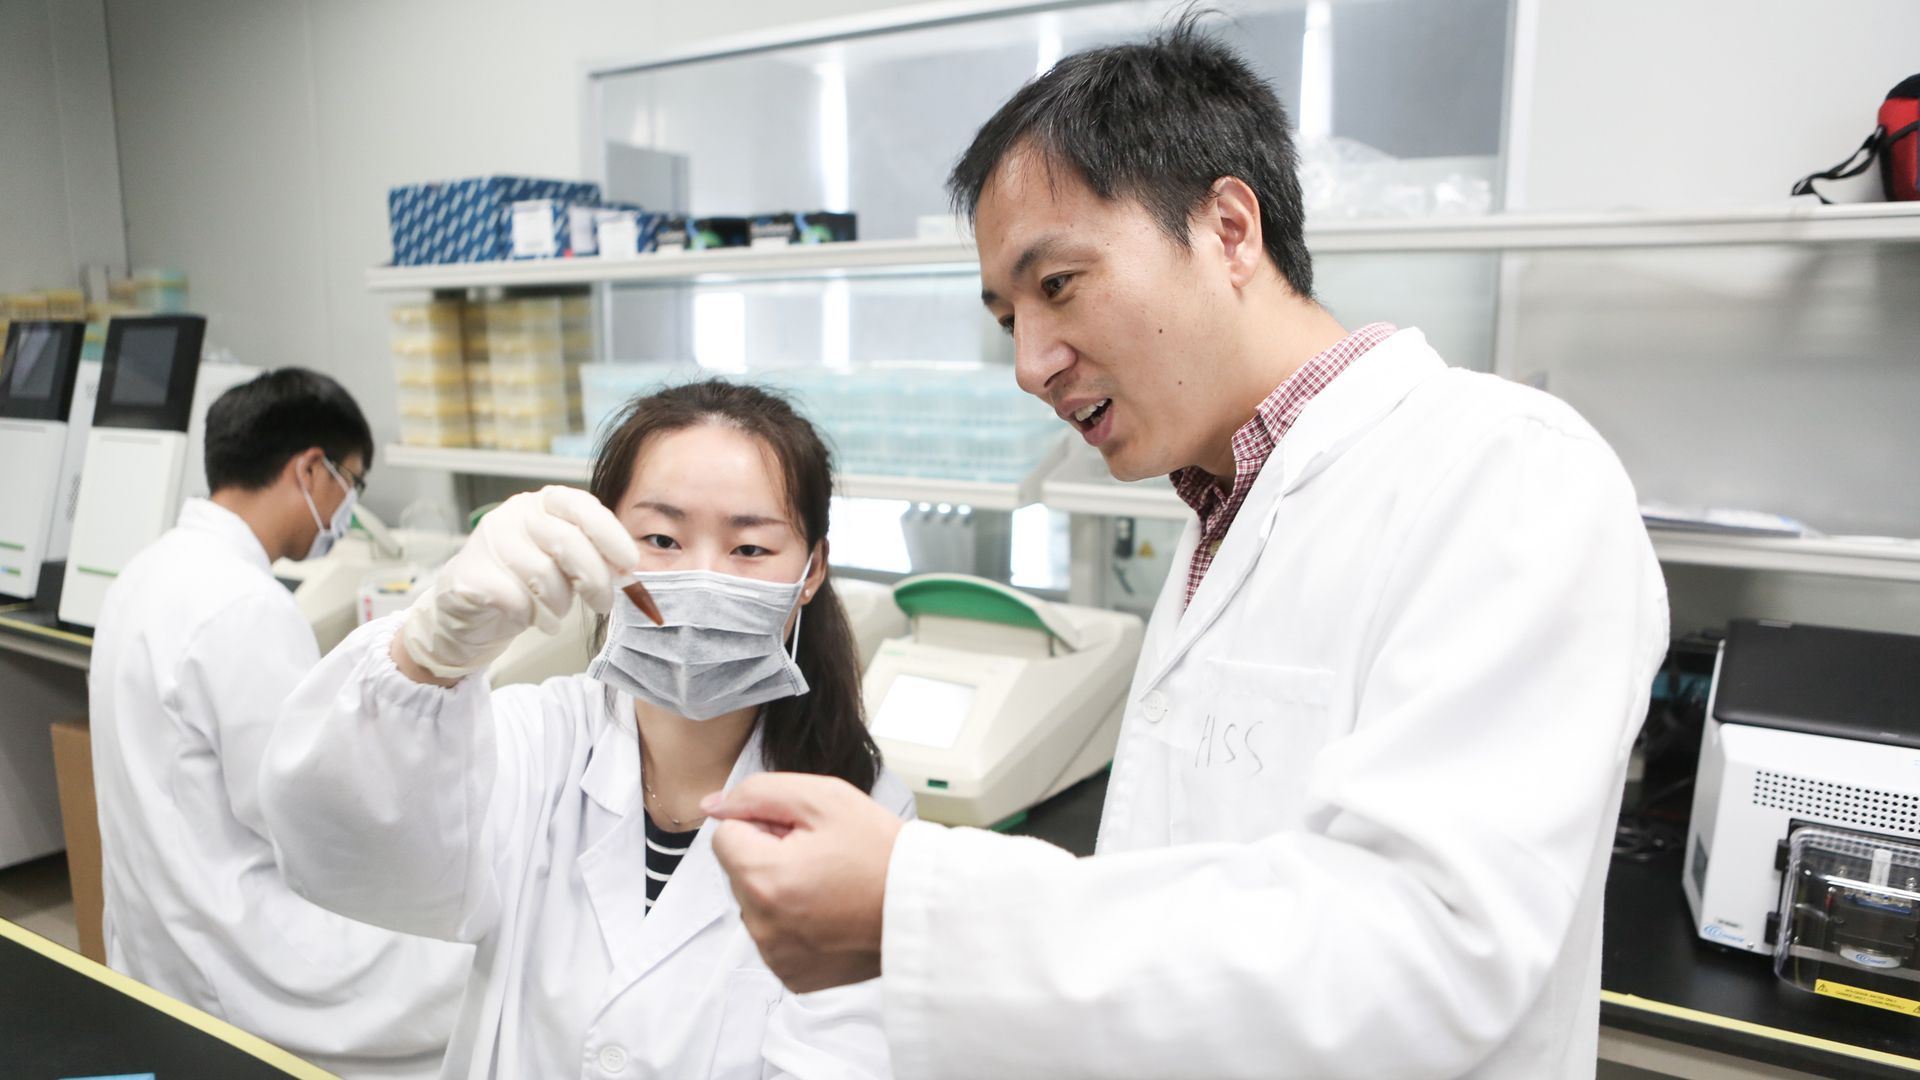 Researcher He Jiankui (R) guides a laboratory staff member at the Direct Genomics lab on August 4, 2016 in Shenzhen, China